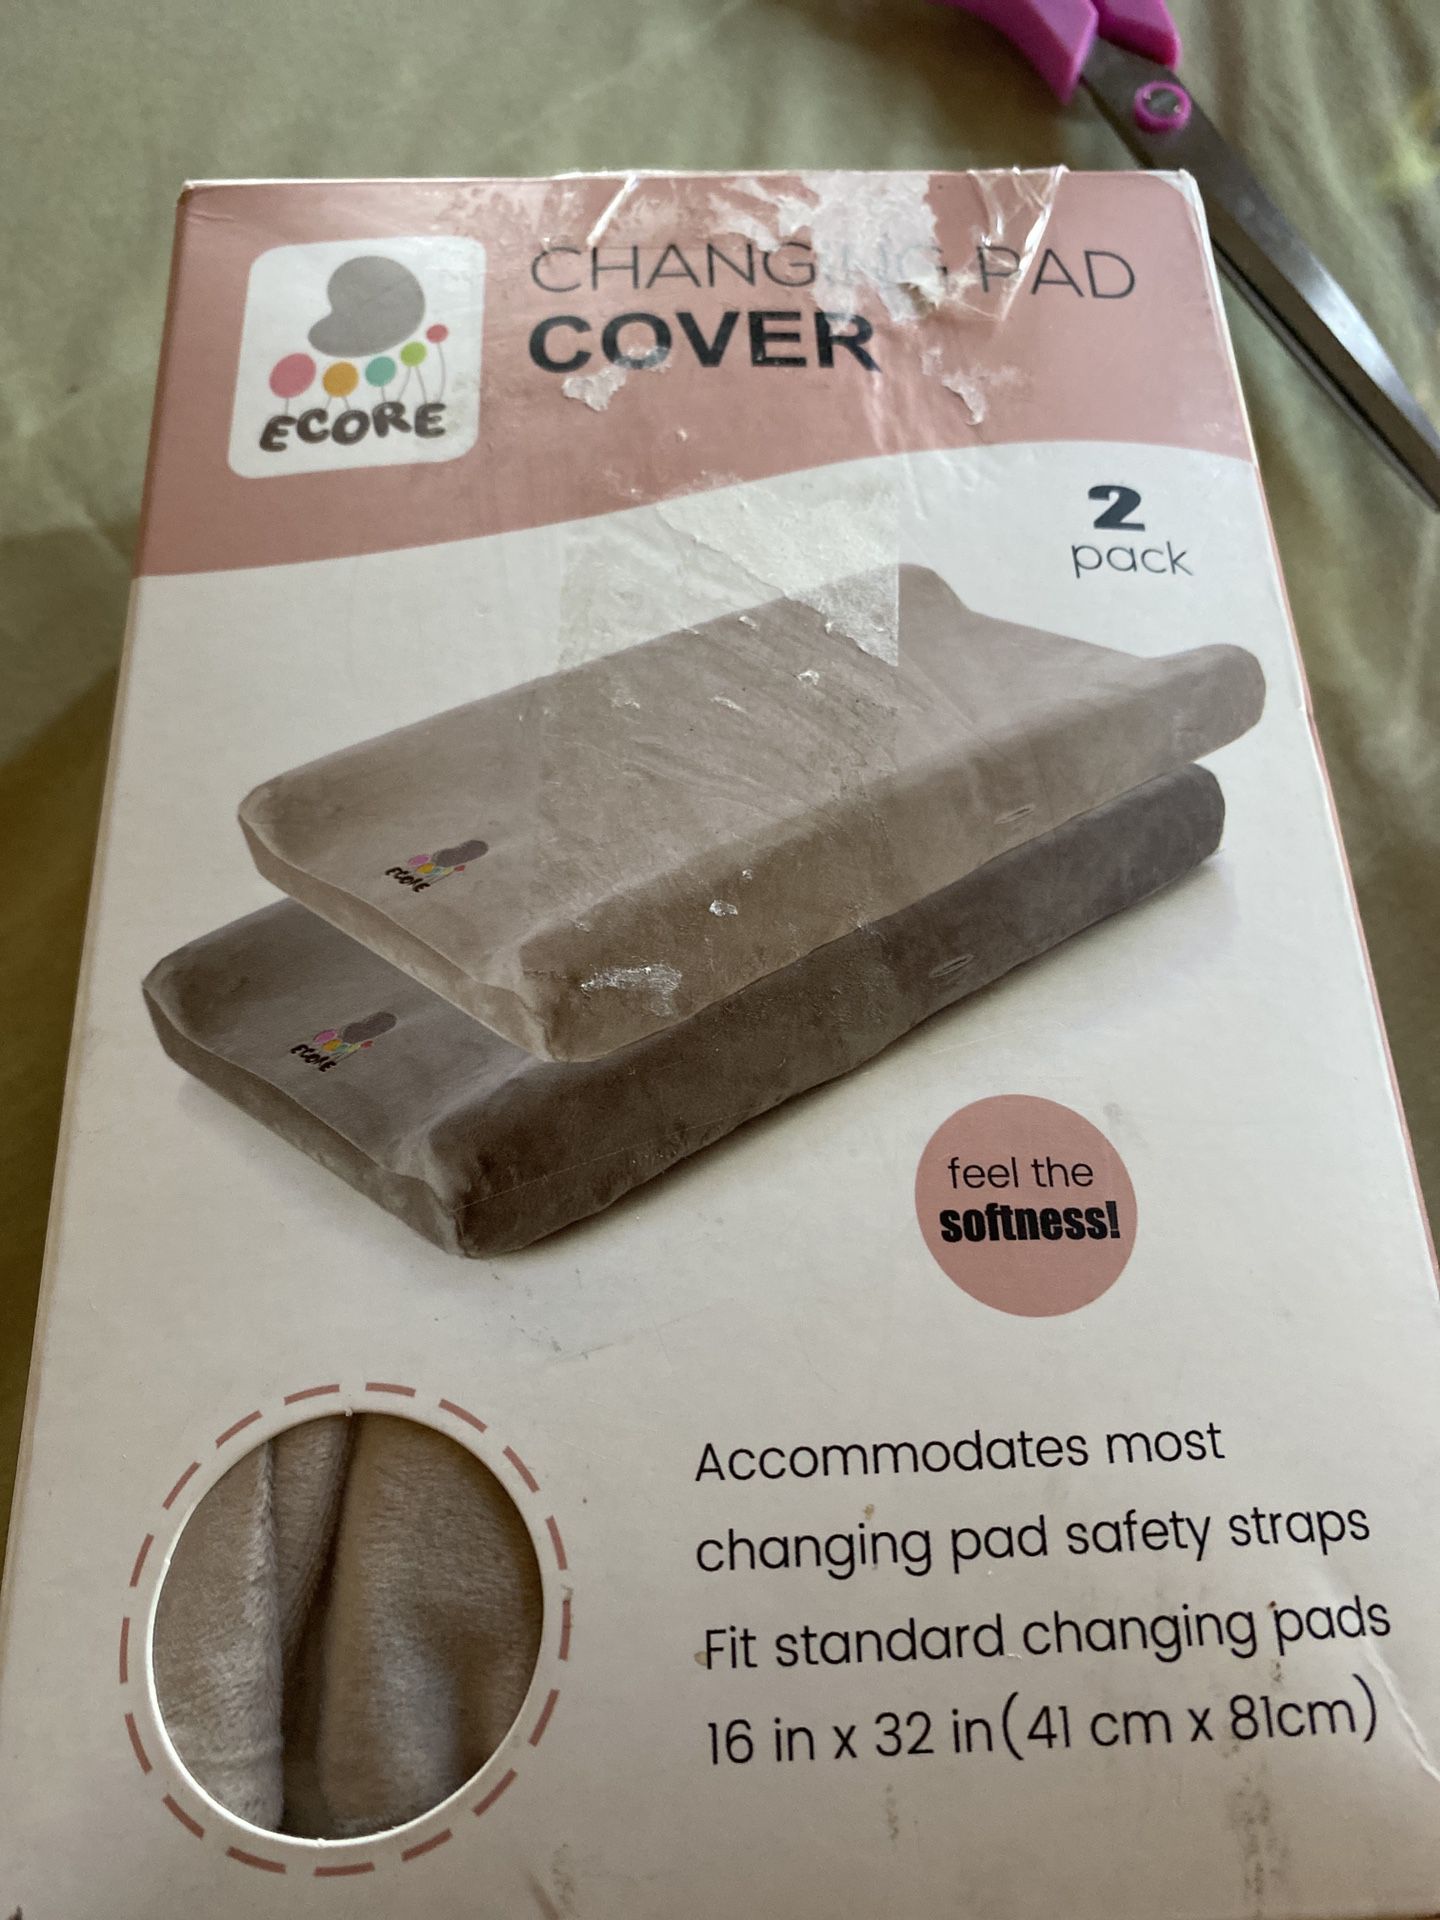 Ecore Stretchy Changing Pad Covers